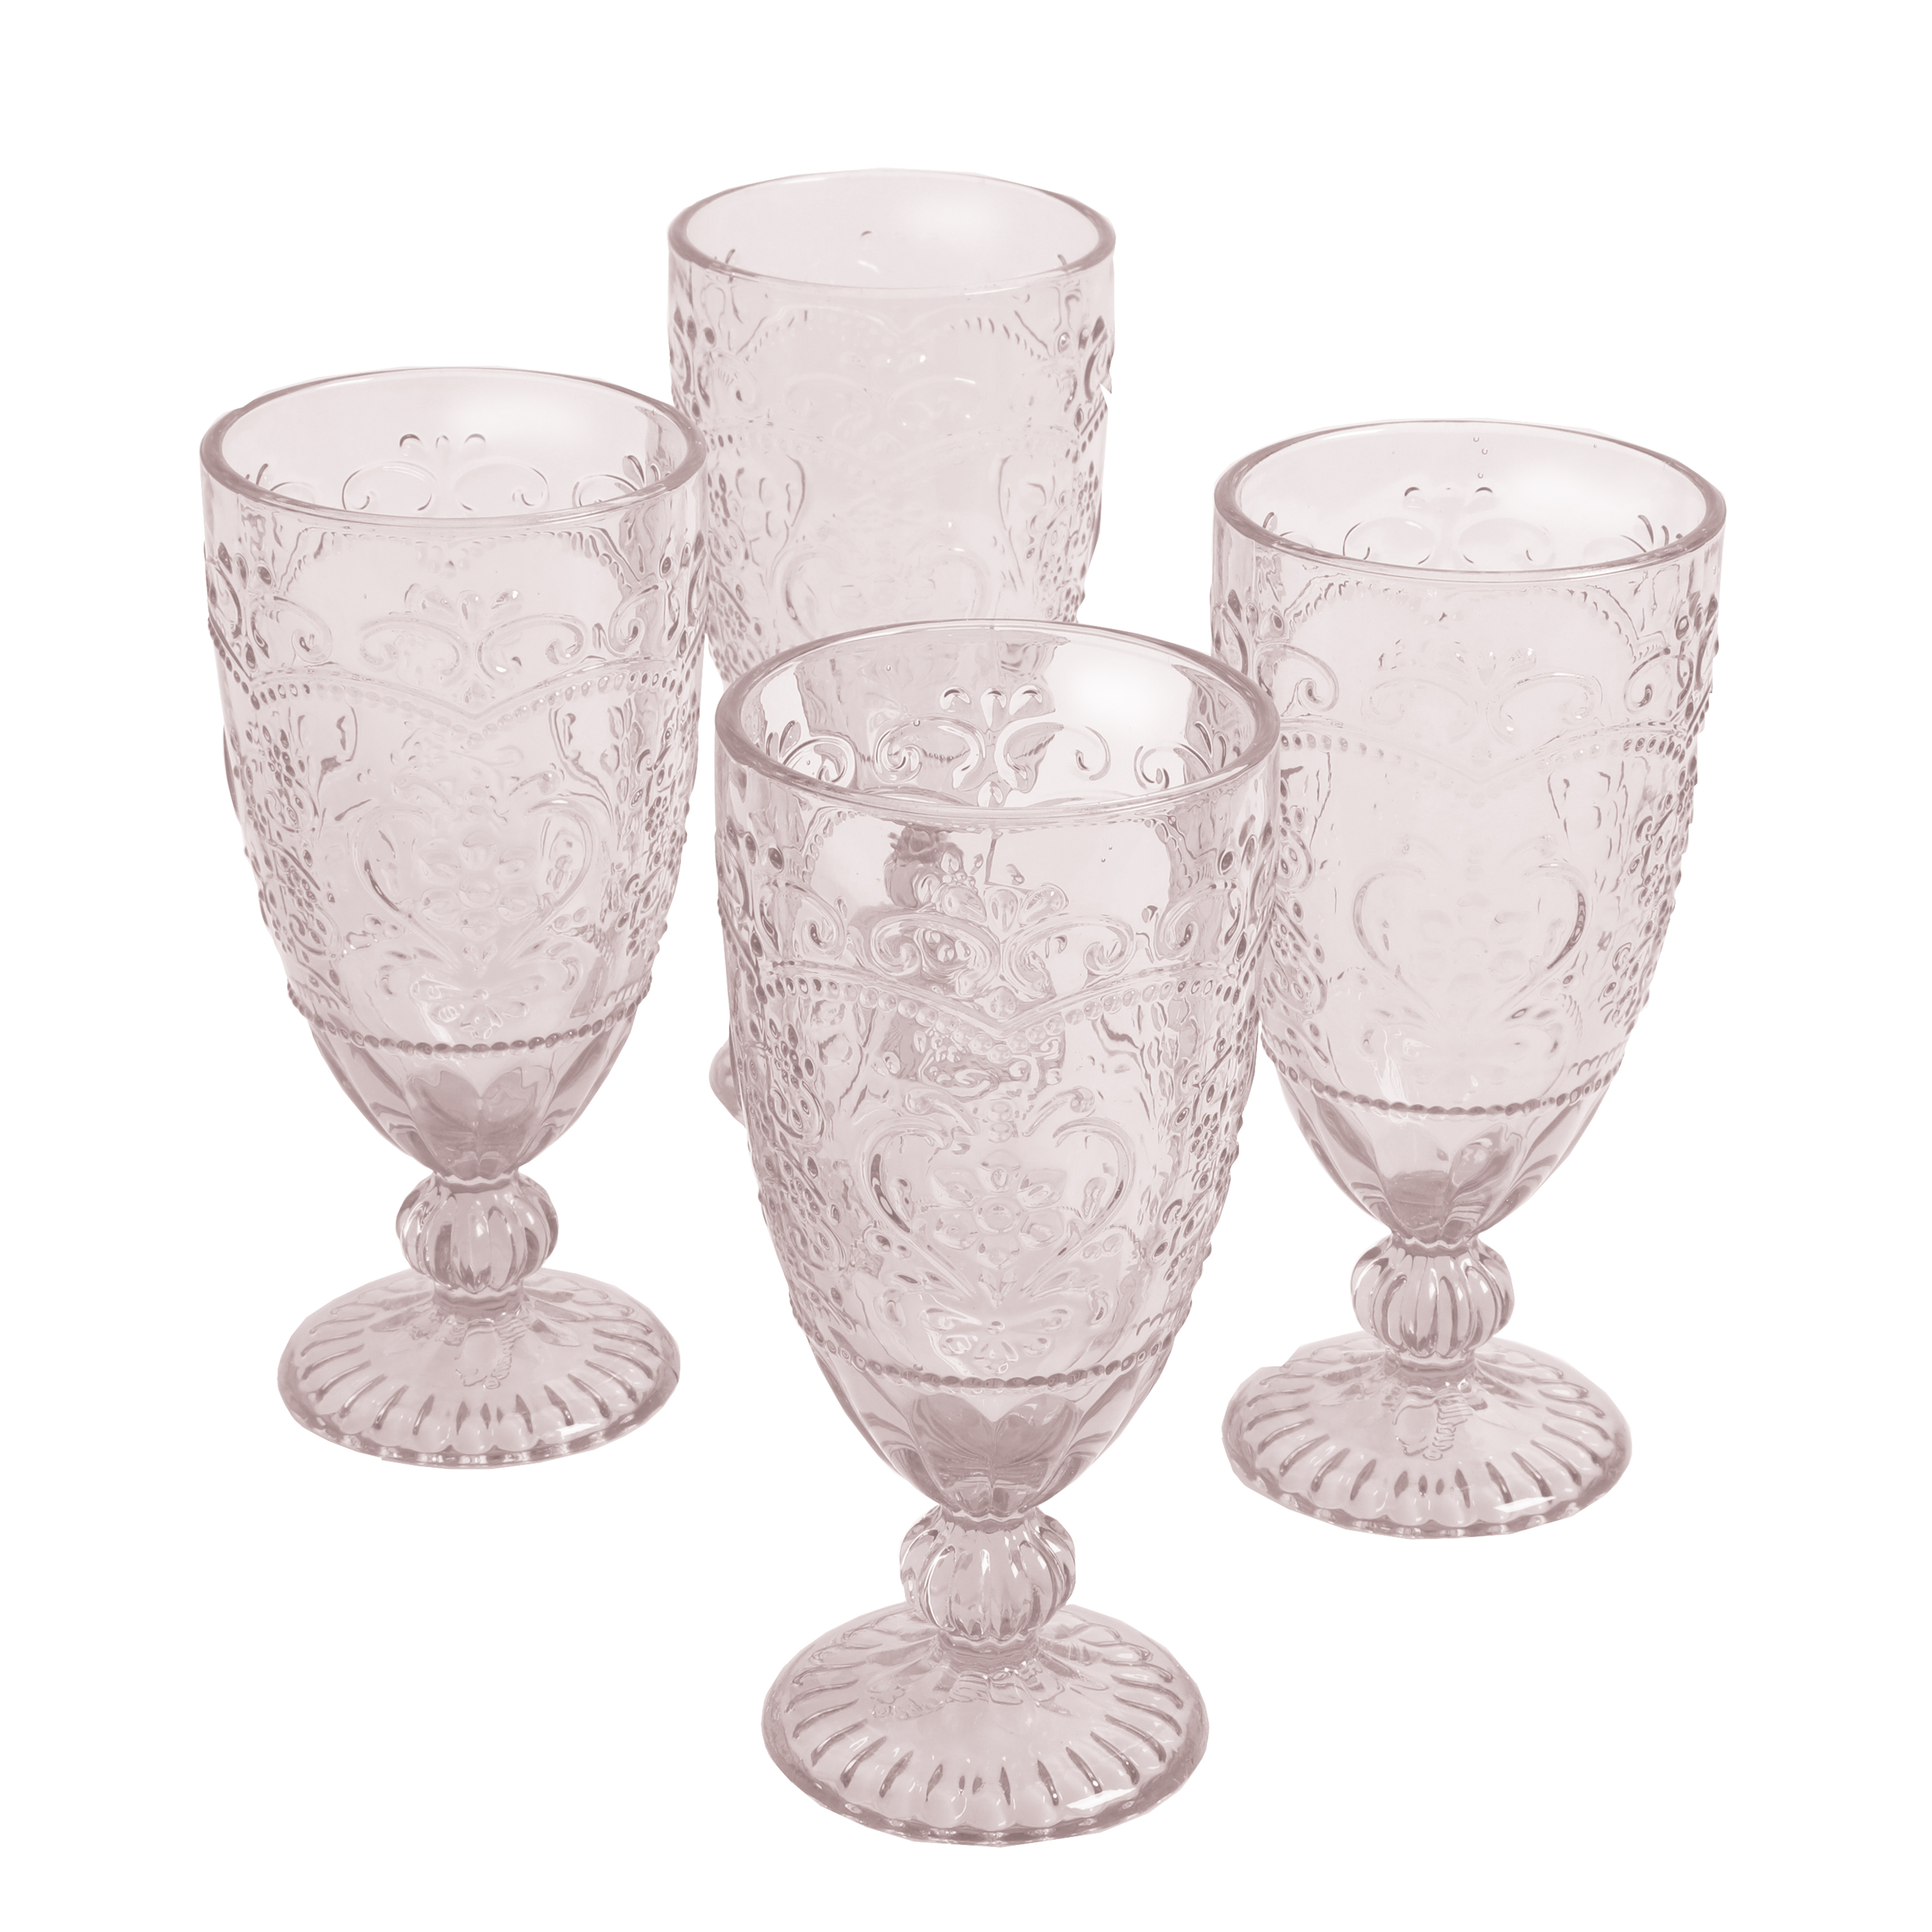 The Pioneer Woman Amelia Glass14.7-Ounce Rose Tea Goblets, Set of 4 - image 1 of 5